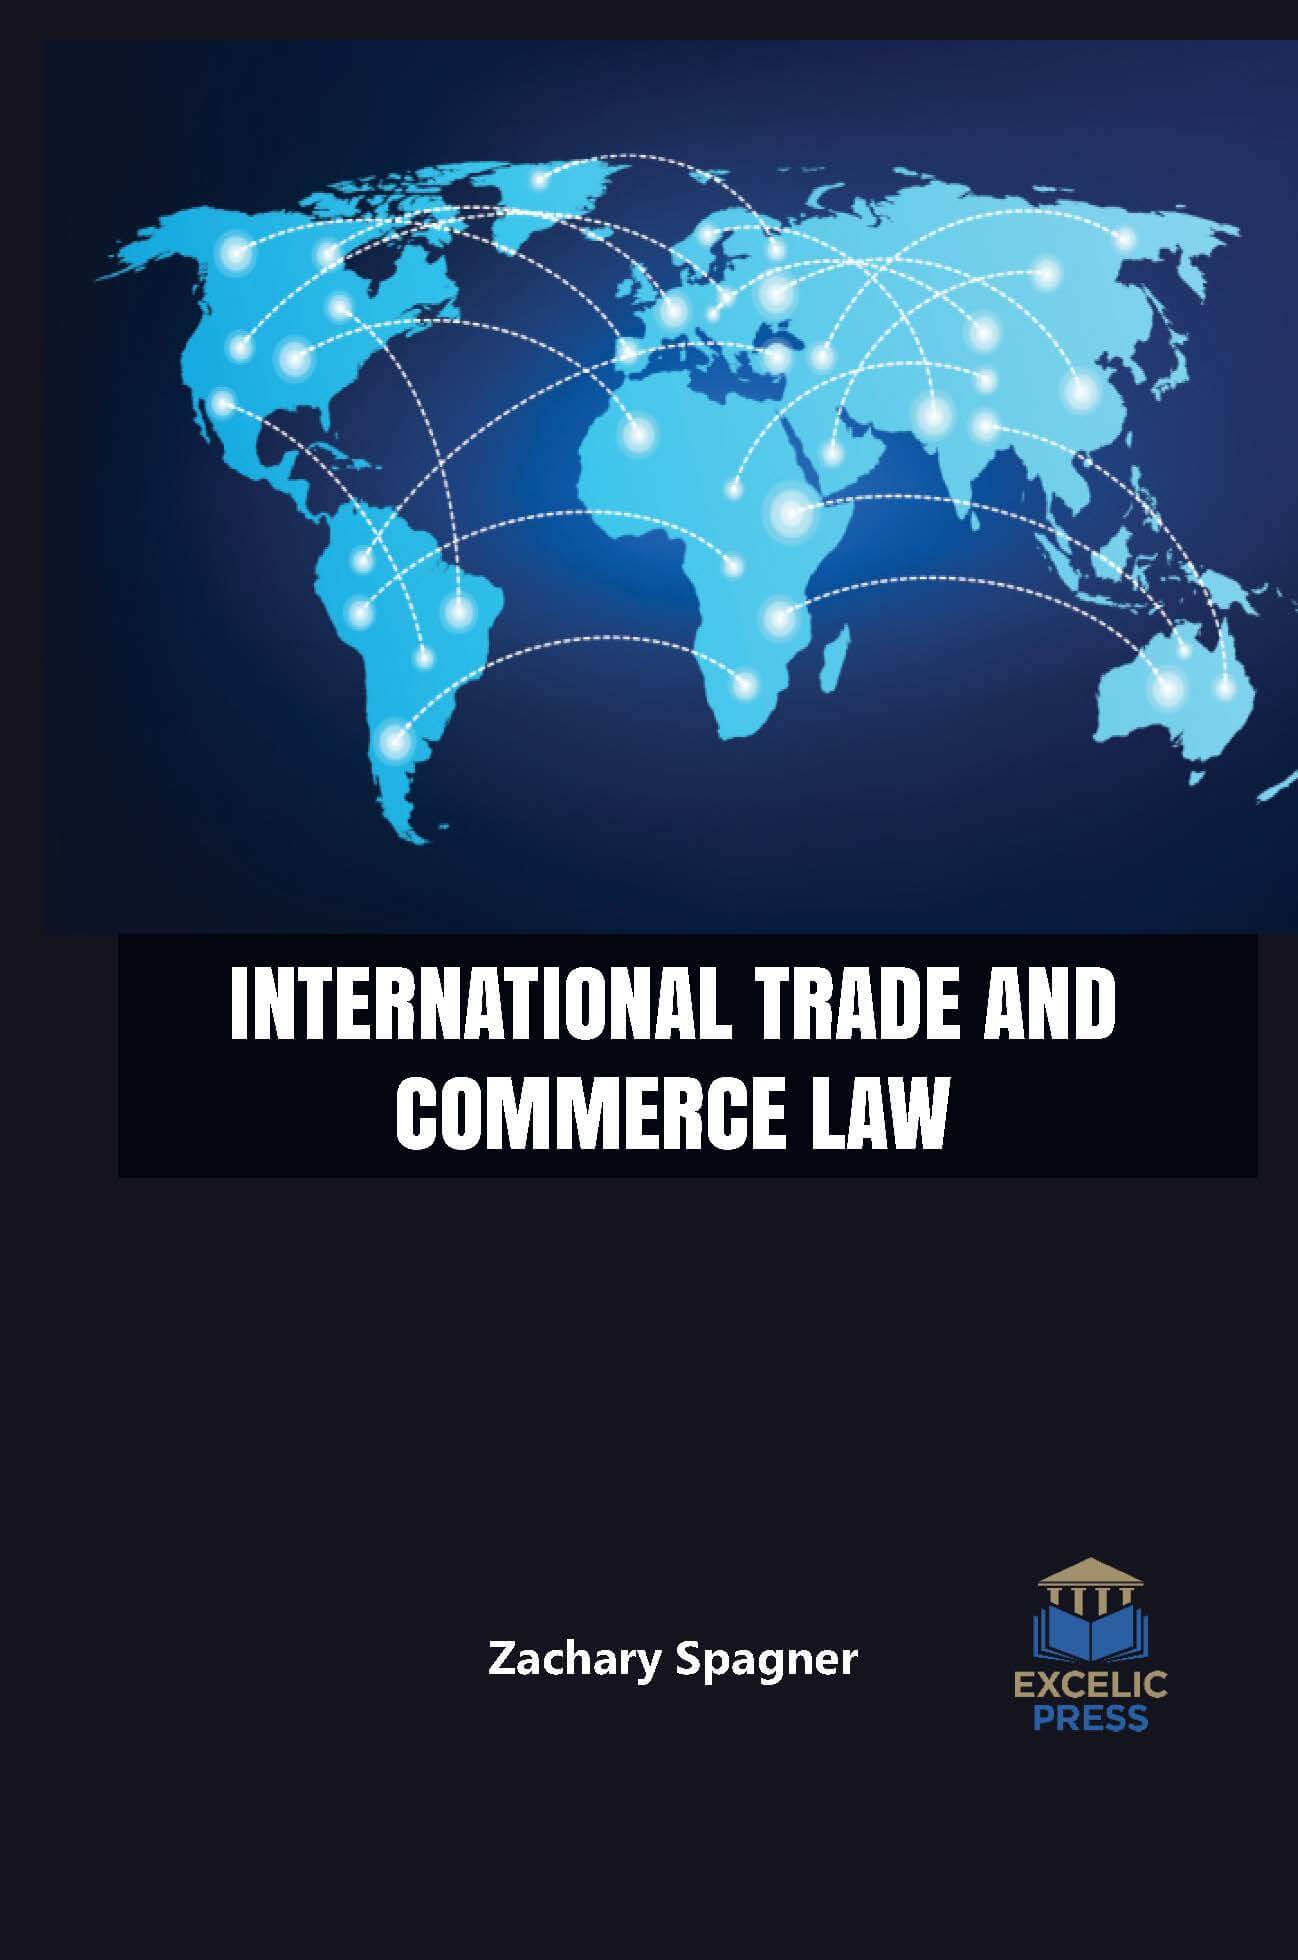 research papers on international trade law